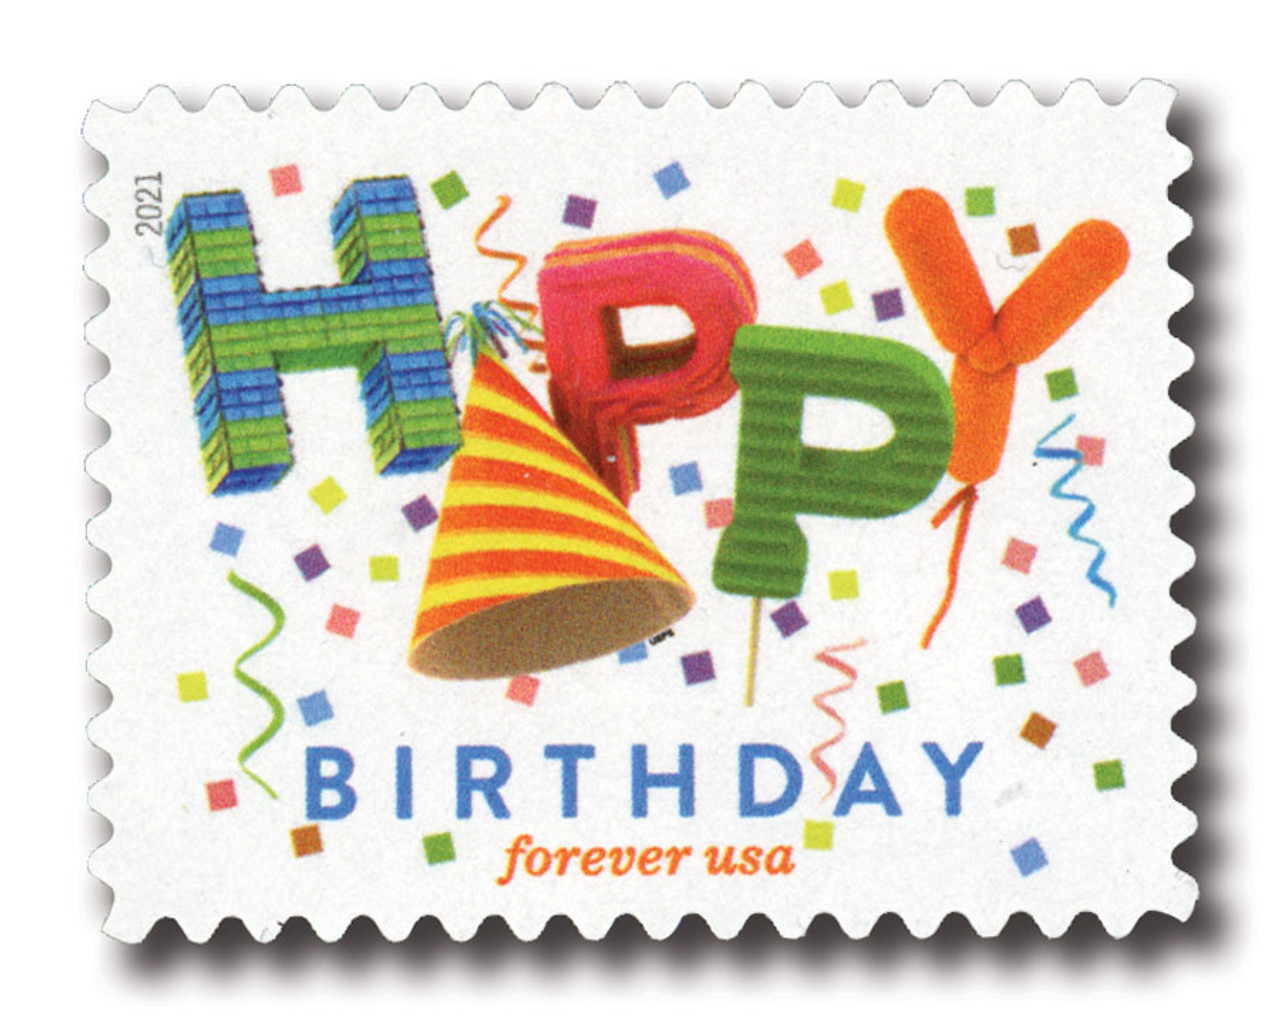 5635 - 2021 First-Class Forever Stamp - Happy Birthday - Mystic Stamp  Company